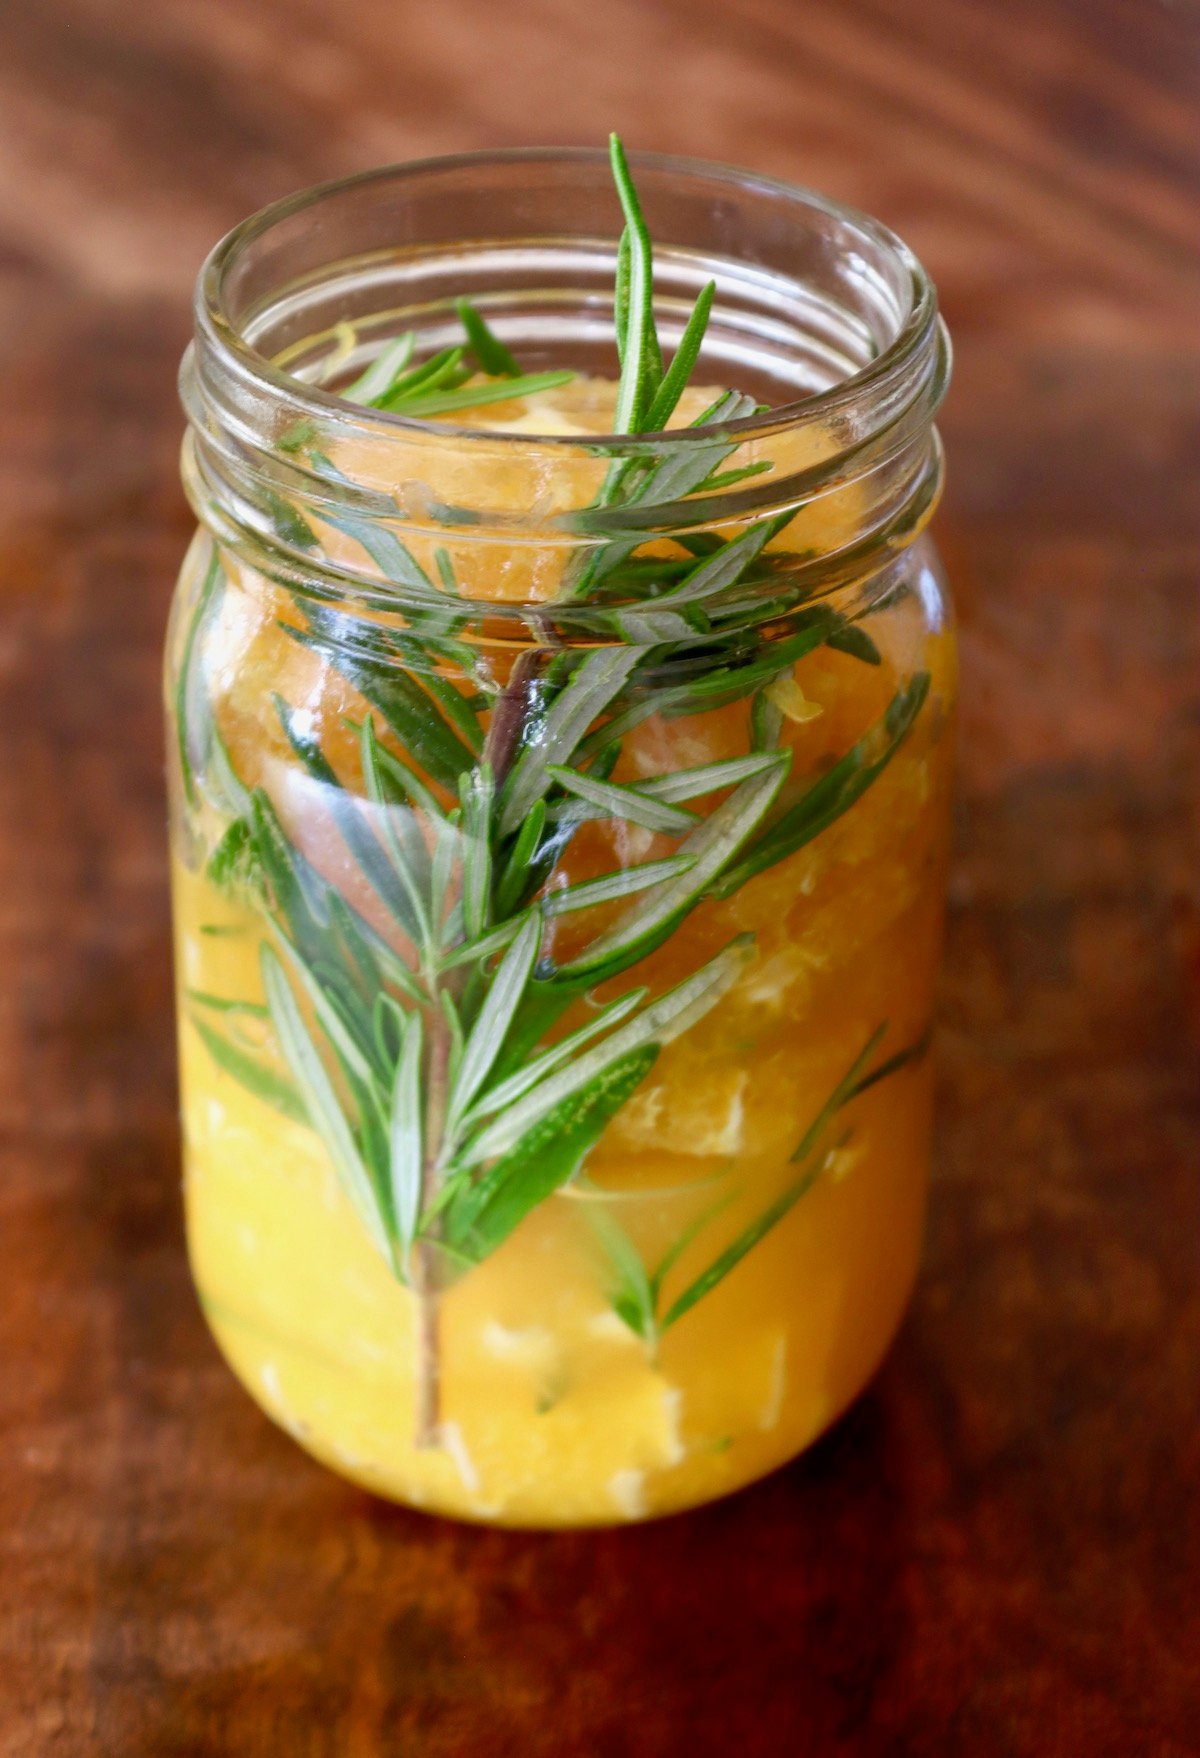 Jar filled with orange slices and rosemary sprig.